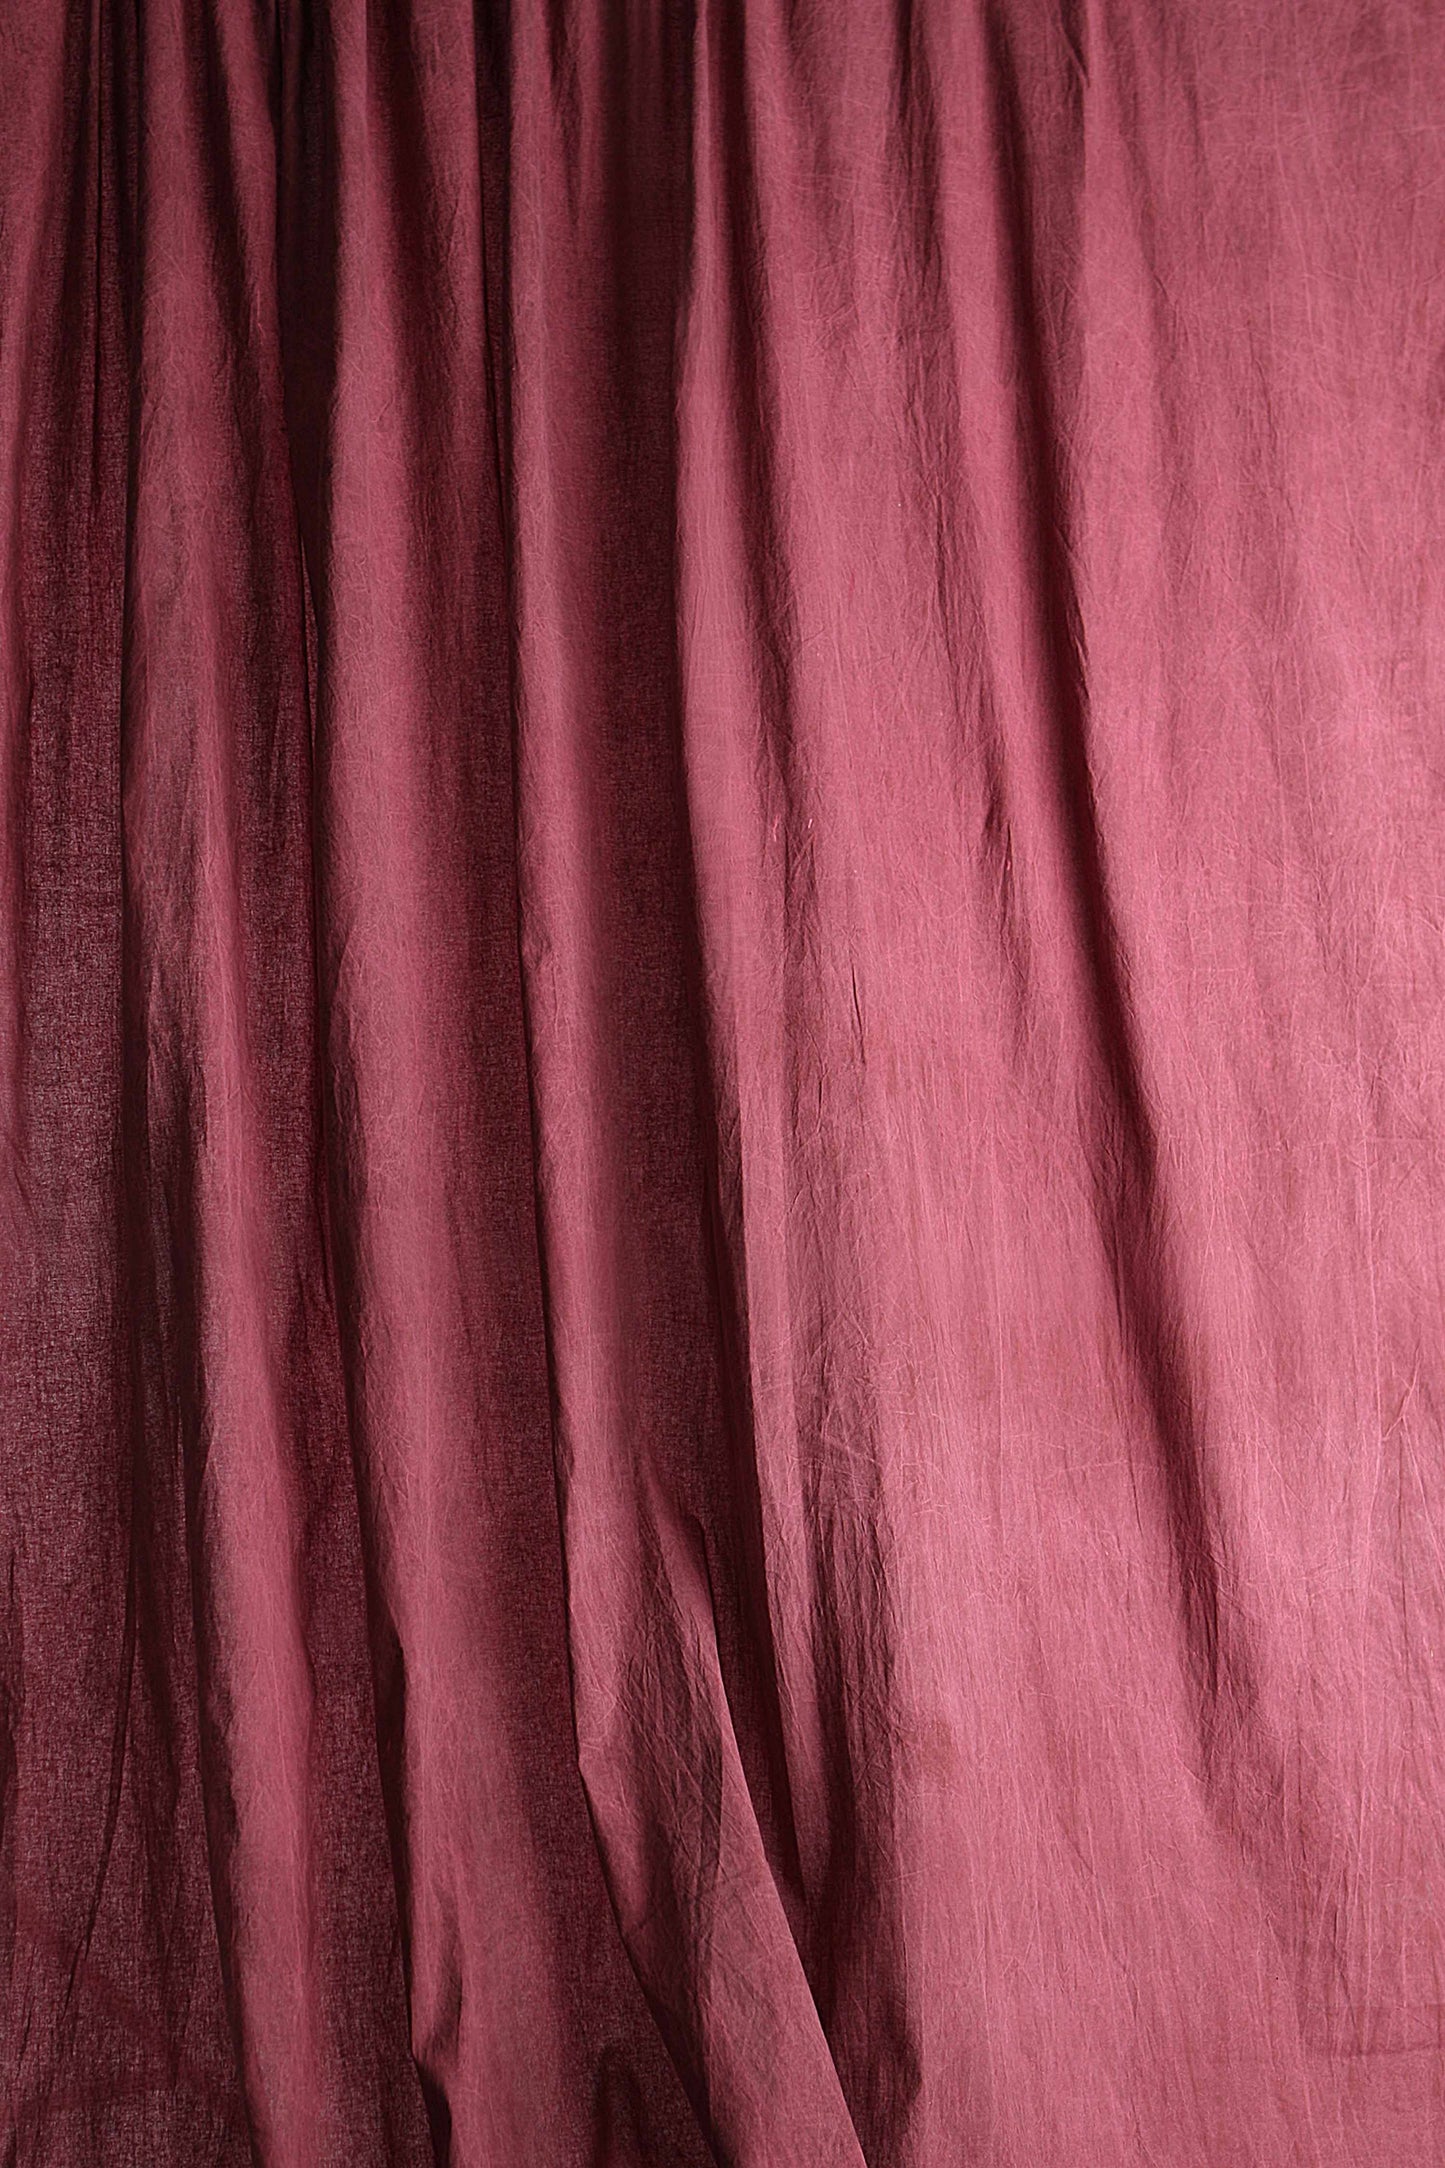 Red Stone Washed Photo Video Backdrop